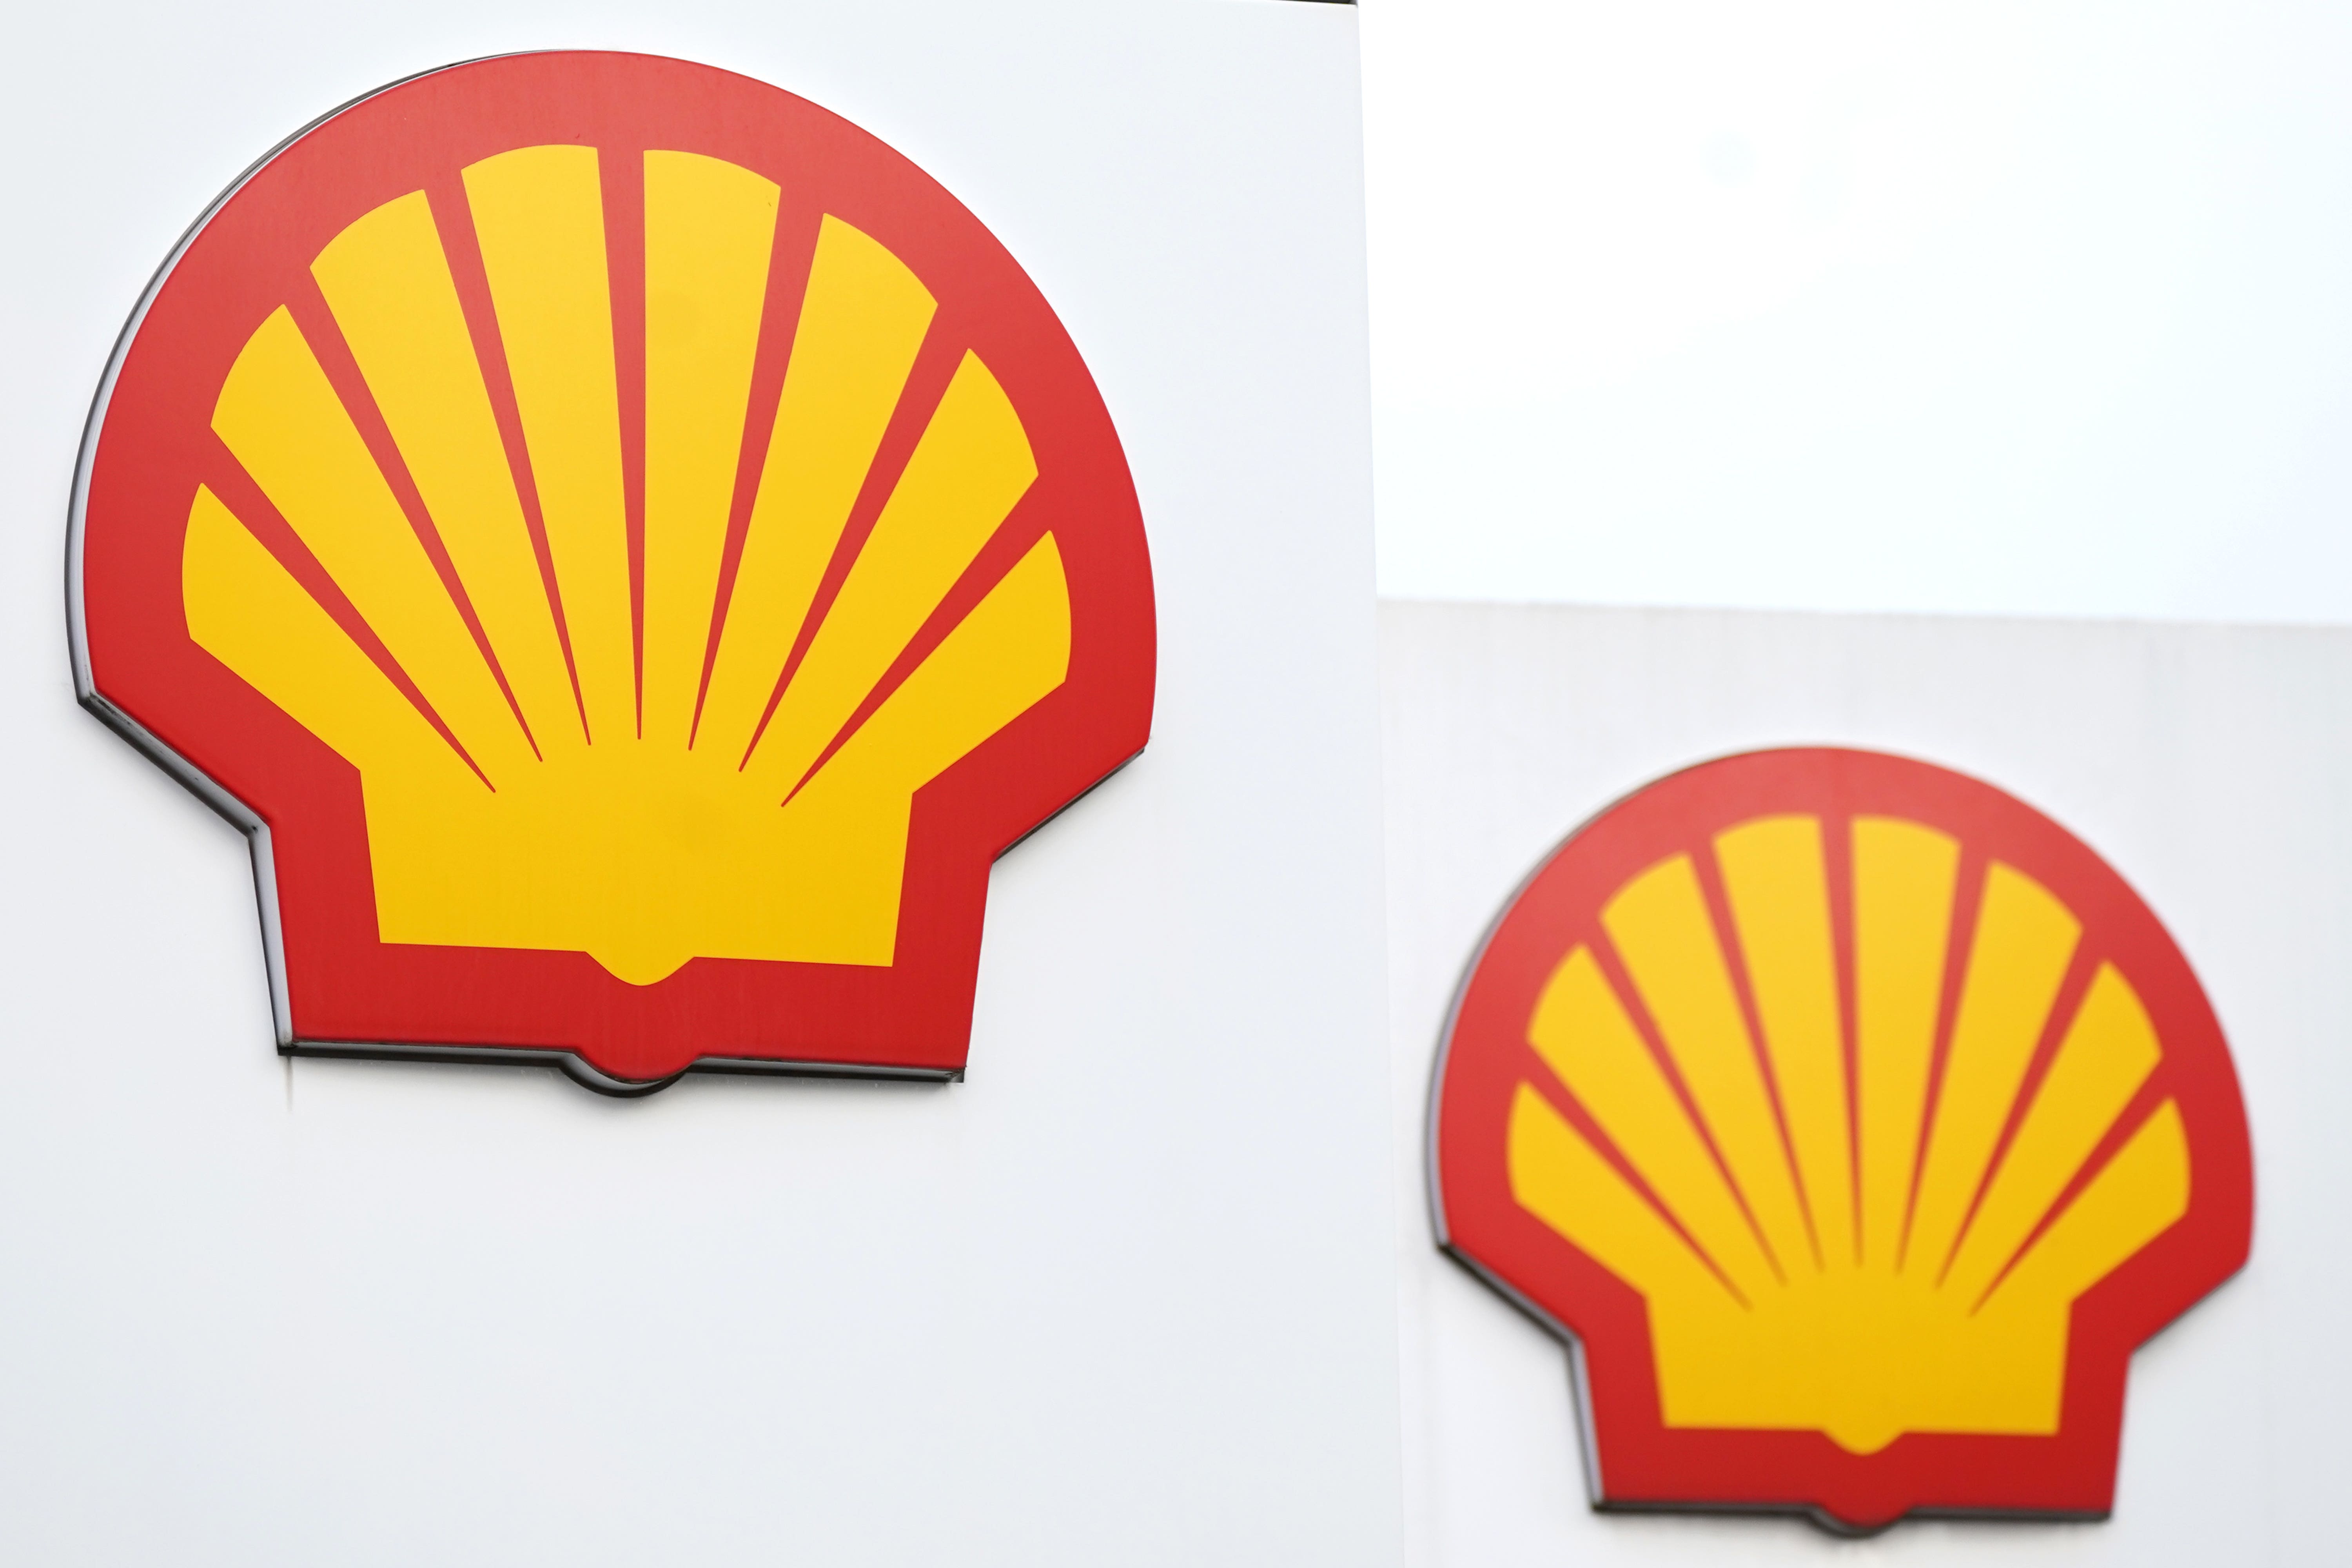 Judge Mr Justice Trower said there was ‘substance’ in Shell’s argument that ClientEarth’s motivation was not the company’s ‘best interests’ (Yui Mok/PA)